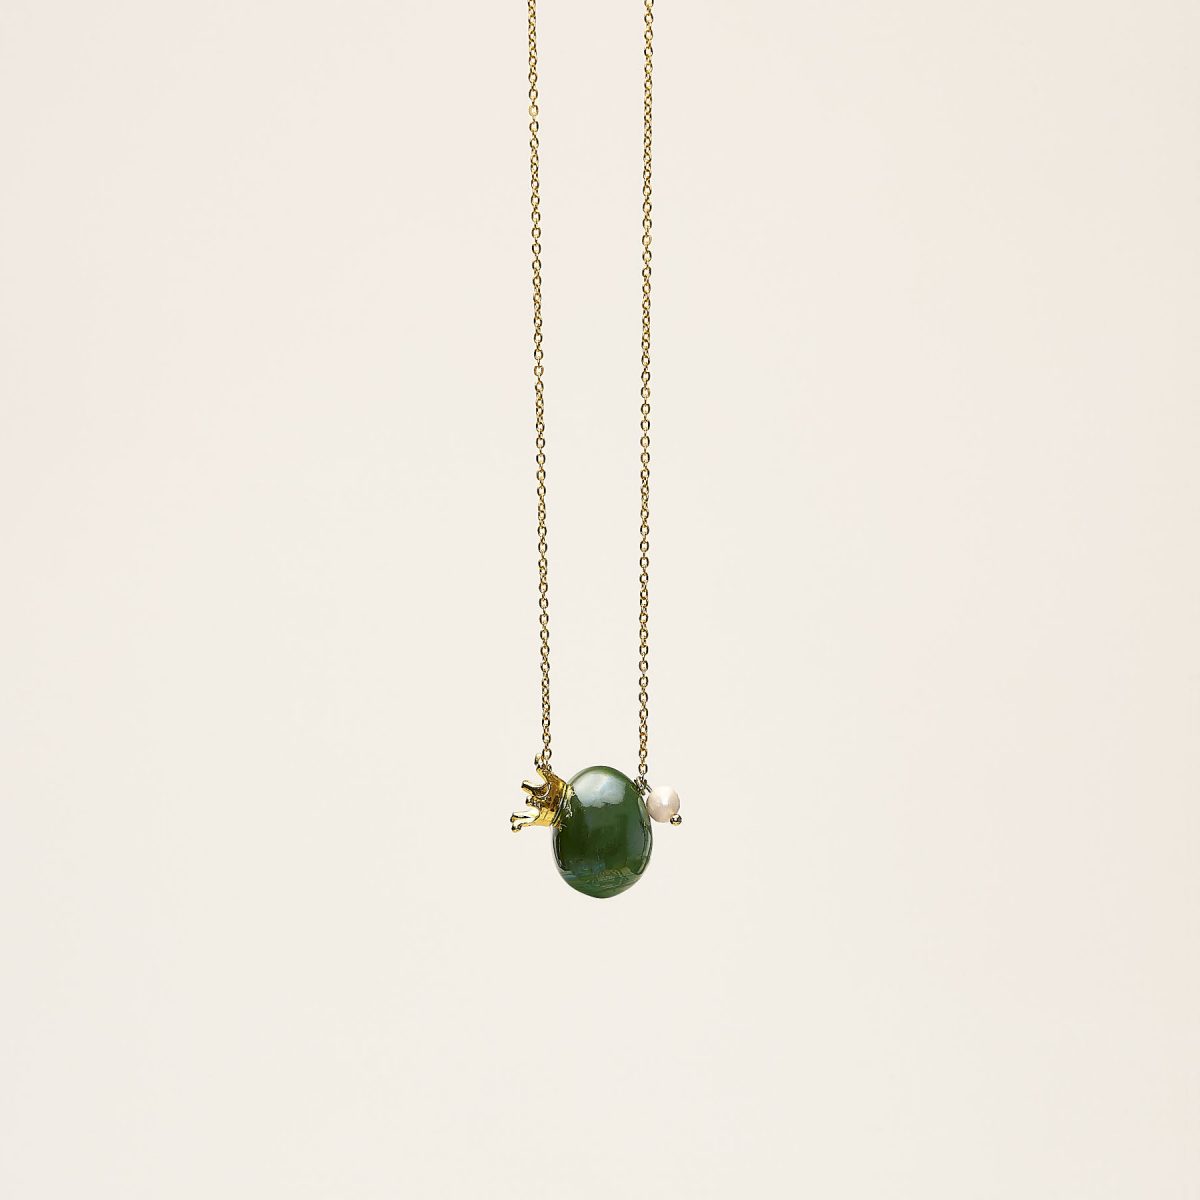 blair in green necklace